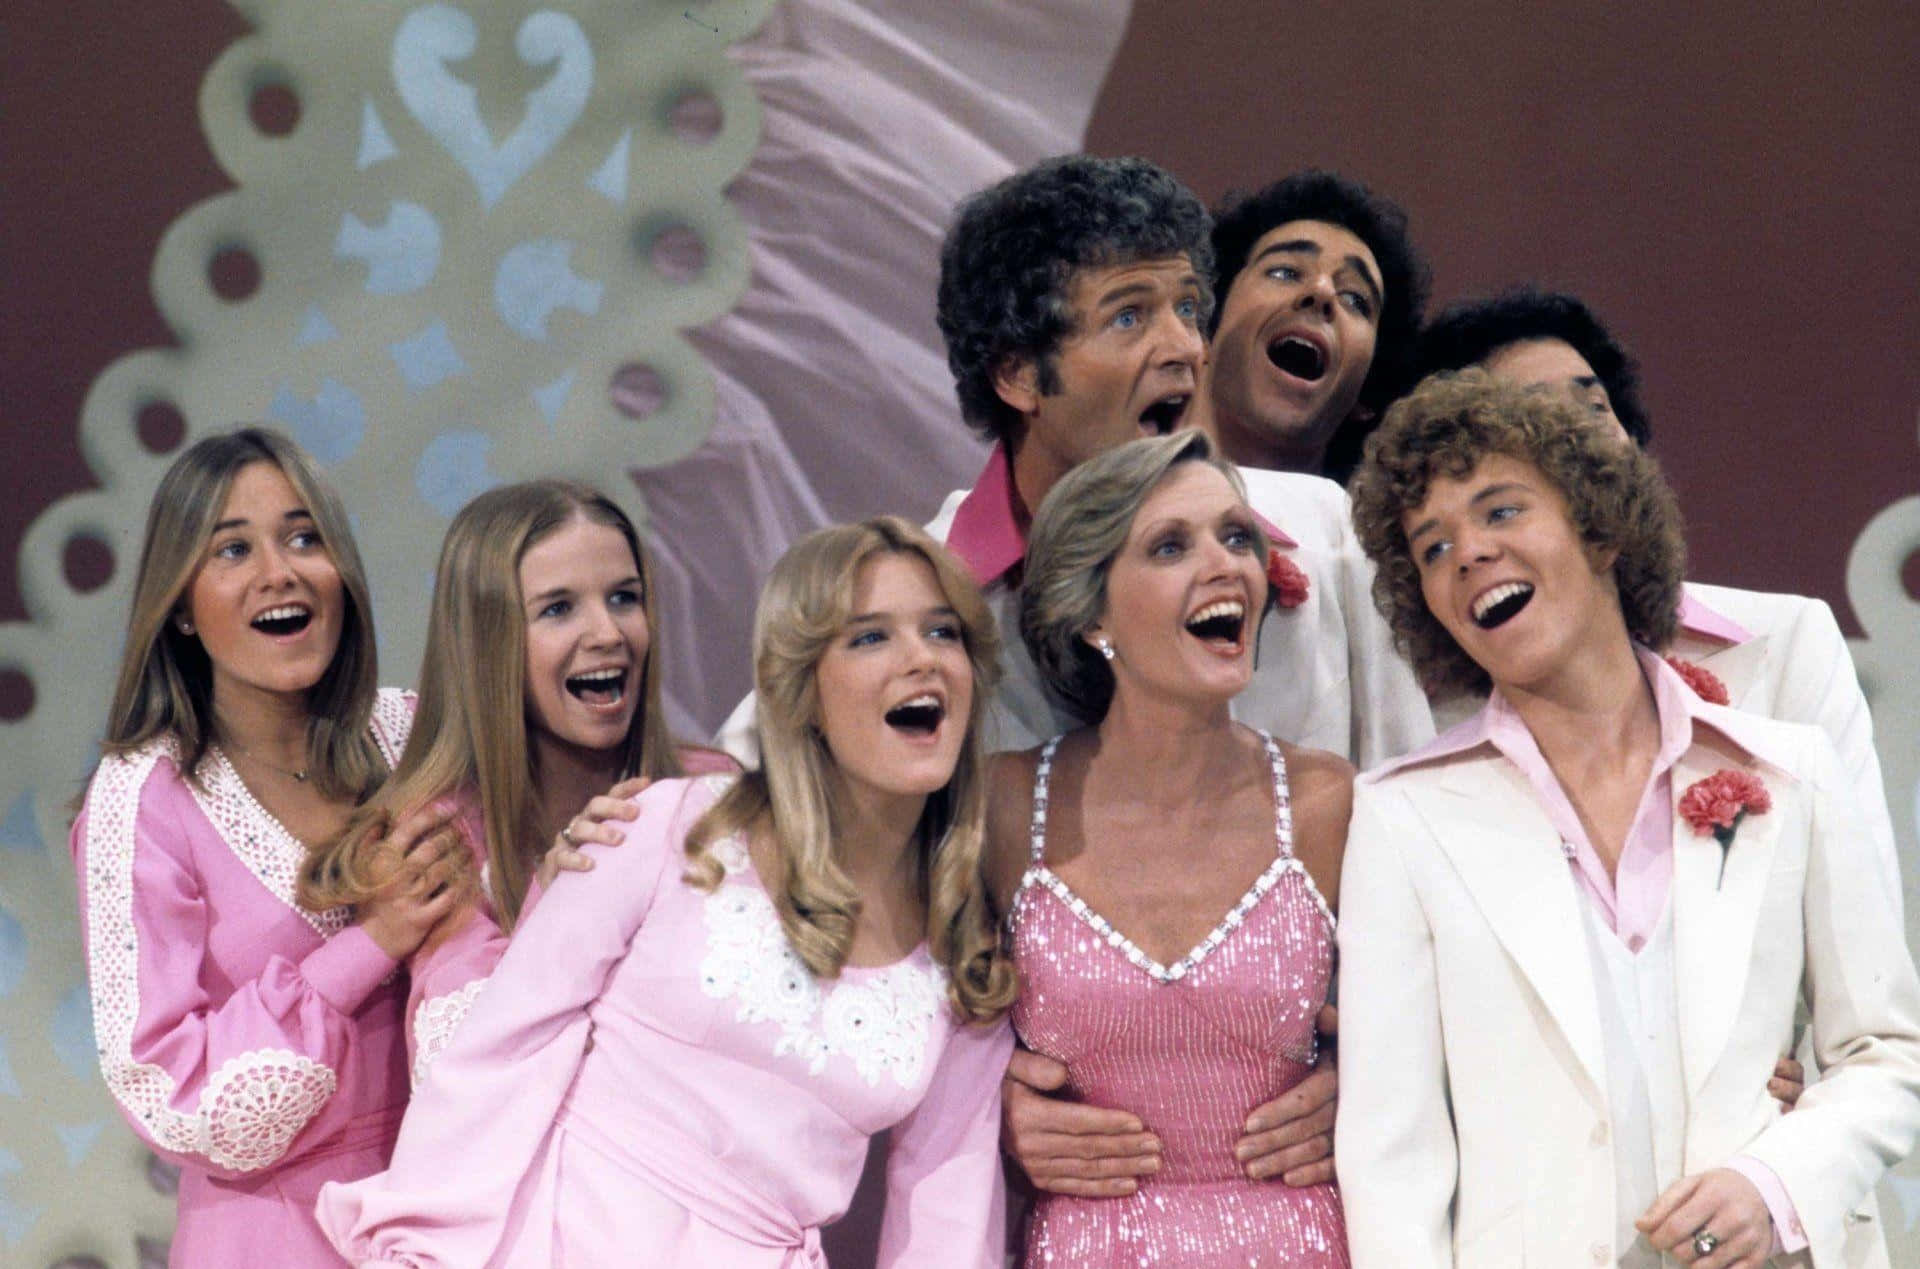 A Group Of People In Pink Suits Are Smiling